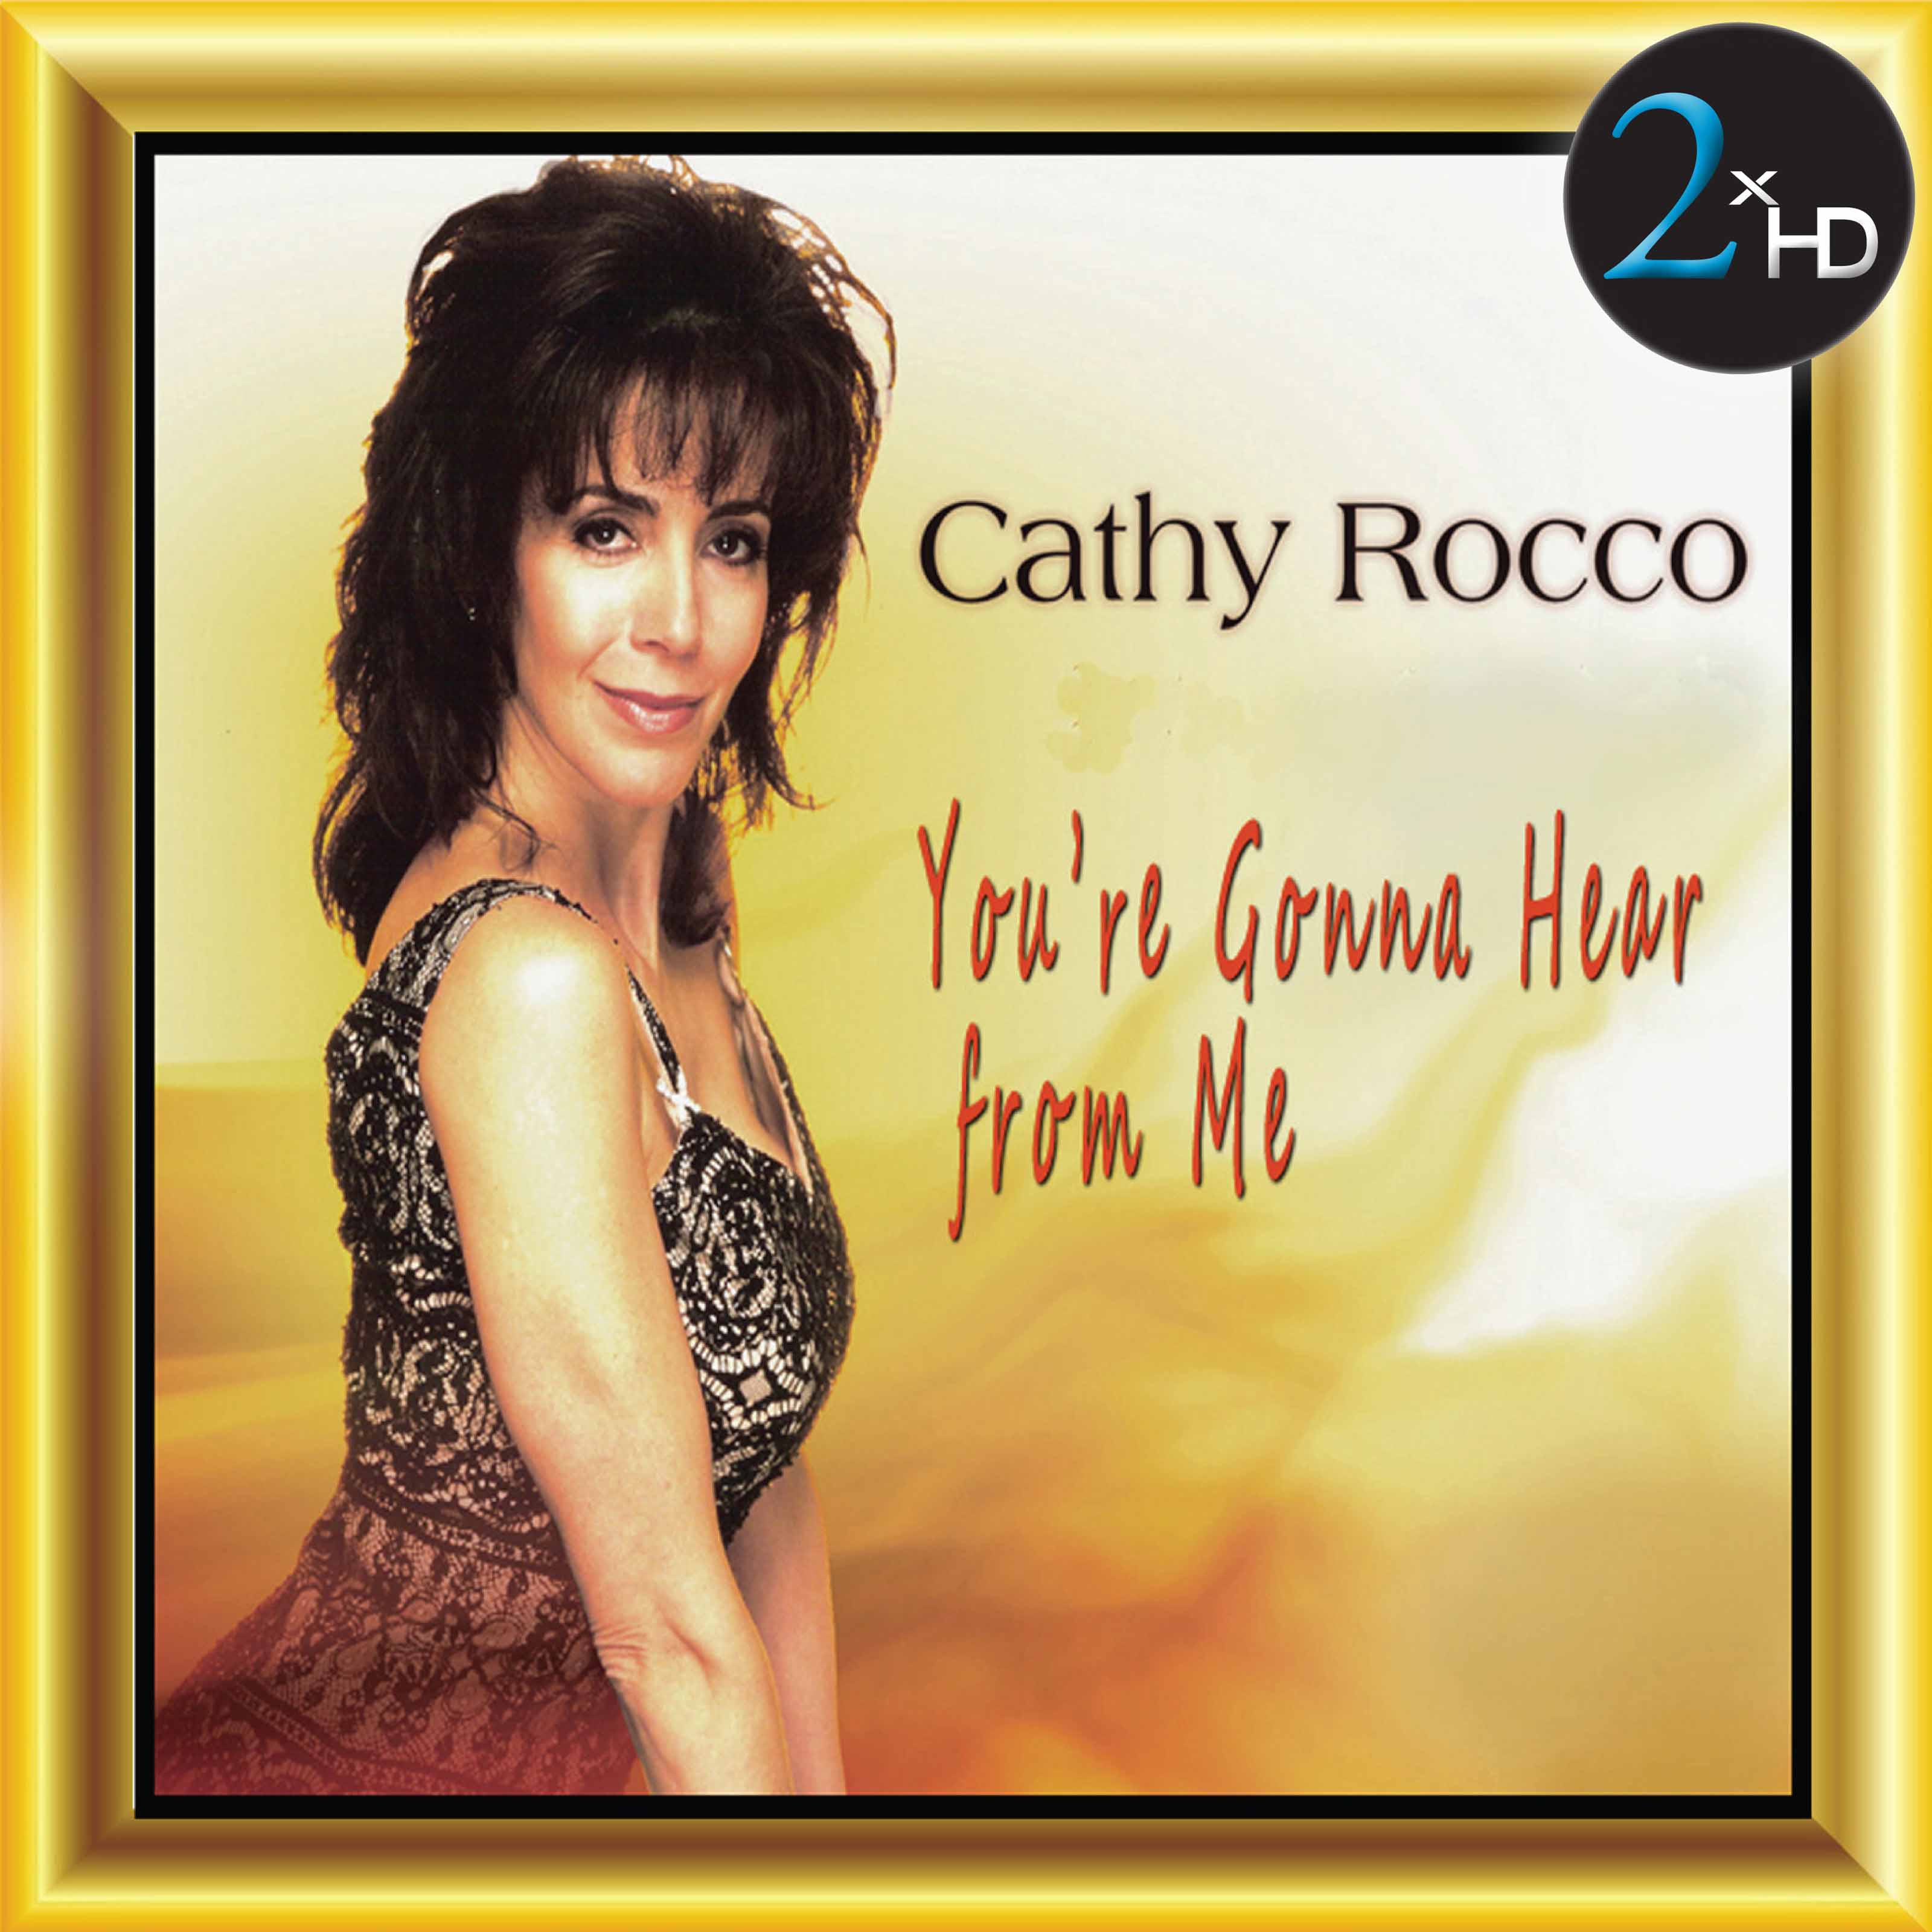 Cathy Rocco – You’re Gonna Hear From Me (2008/2017) [HDTracks FLAC 24bit/44,1kHz]